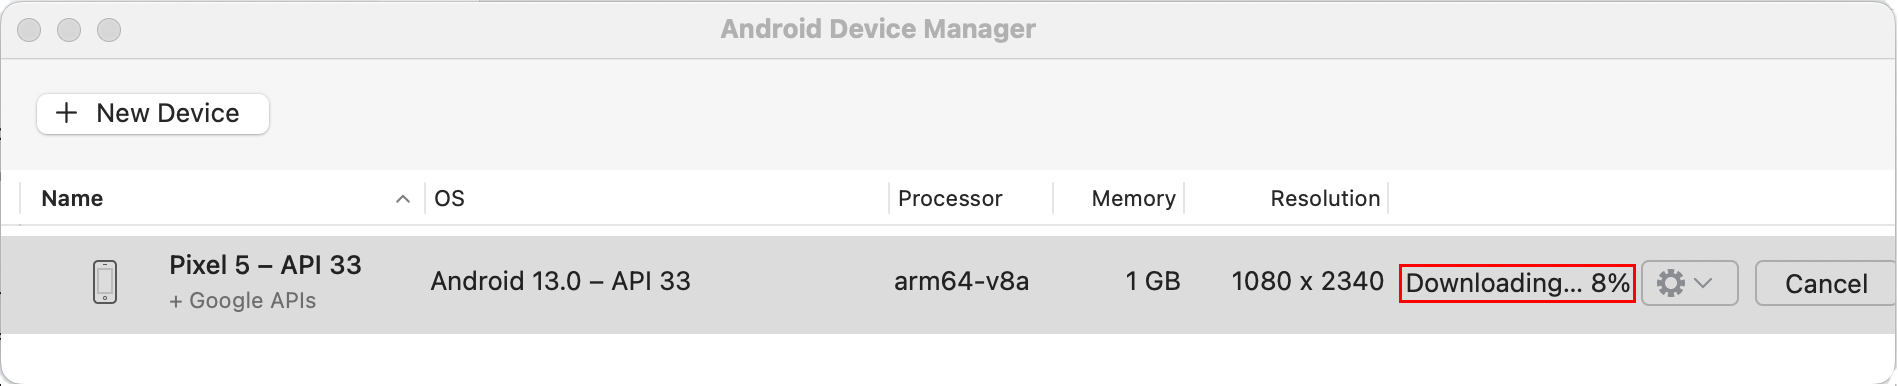 Android Device Manager dialog showing an 8% downloading progress for the Google Pixel 5 mobile device.